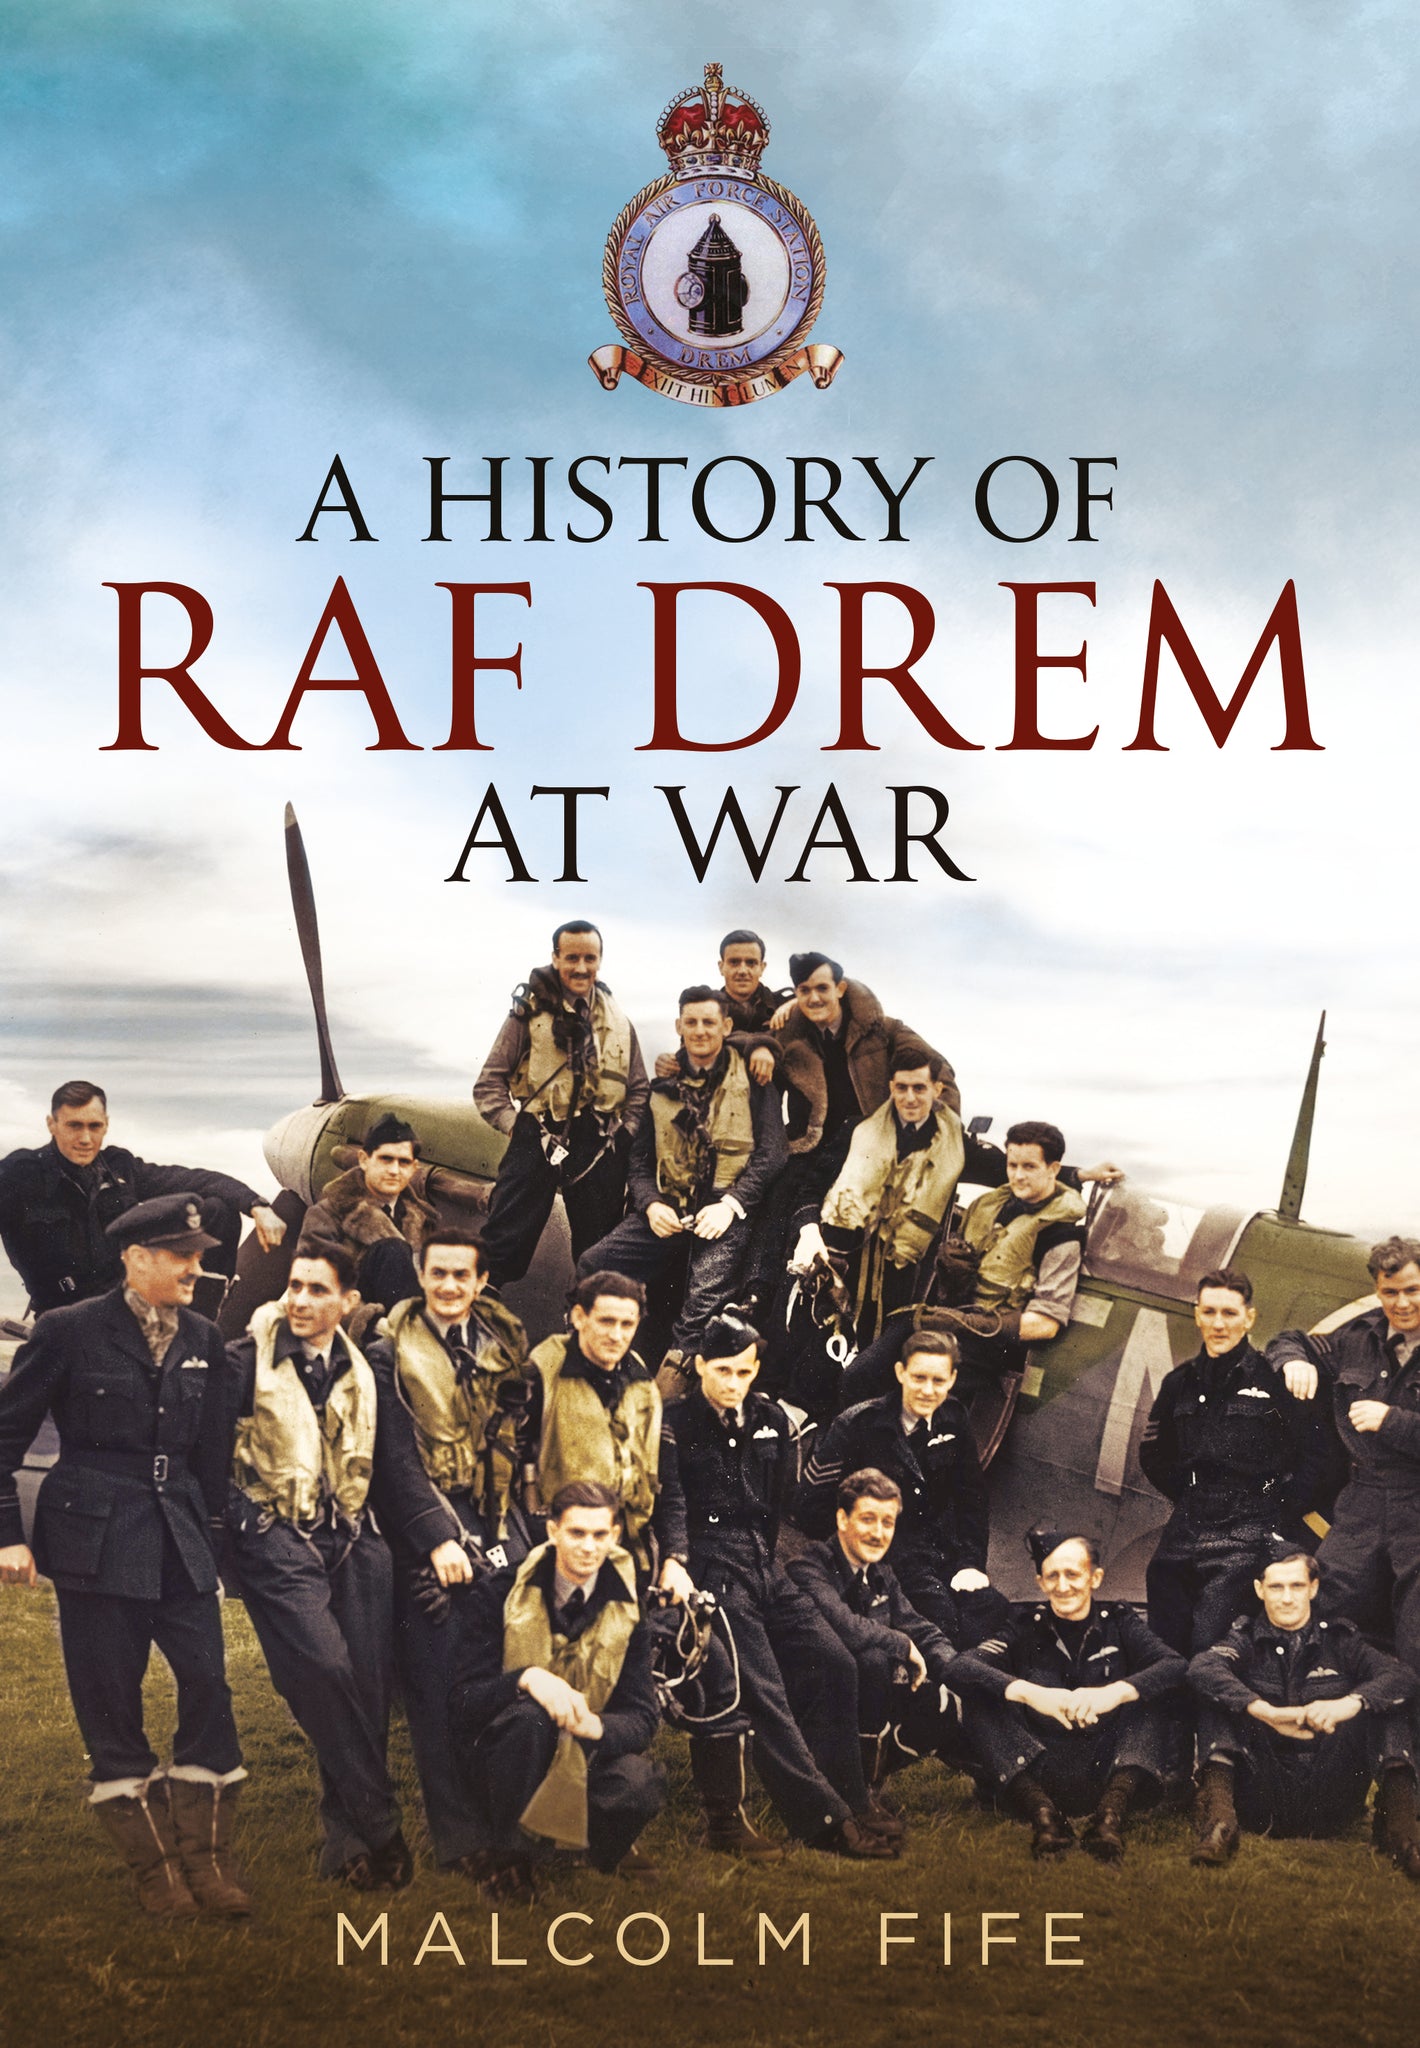 A History of RAF Drem at War - available from Fonthill Media